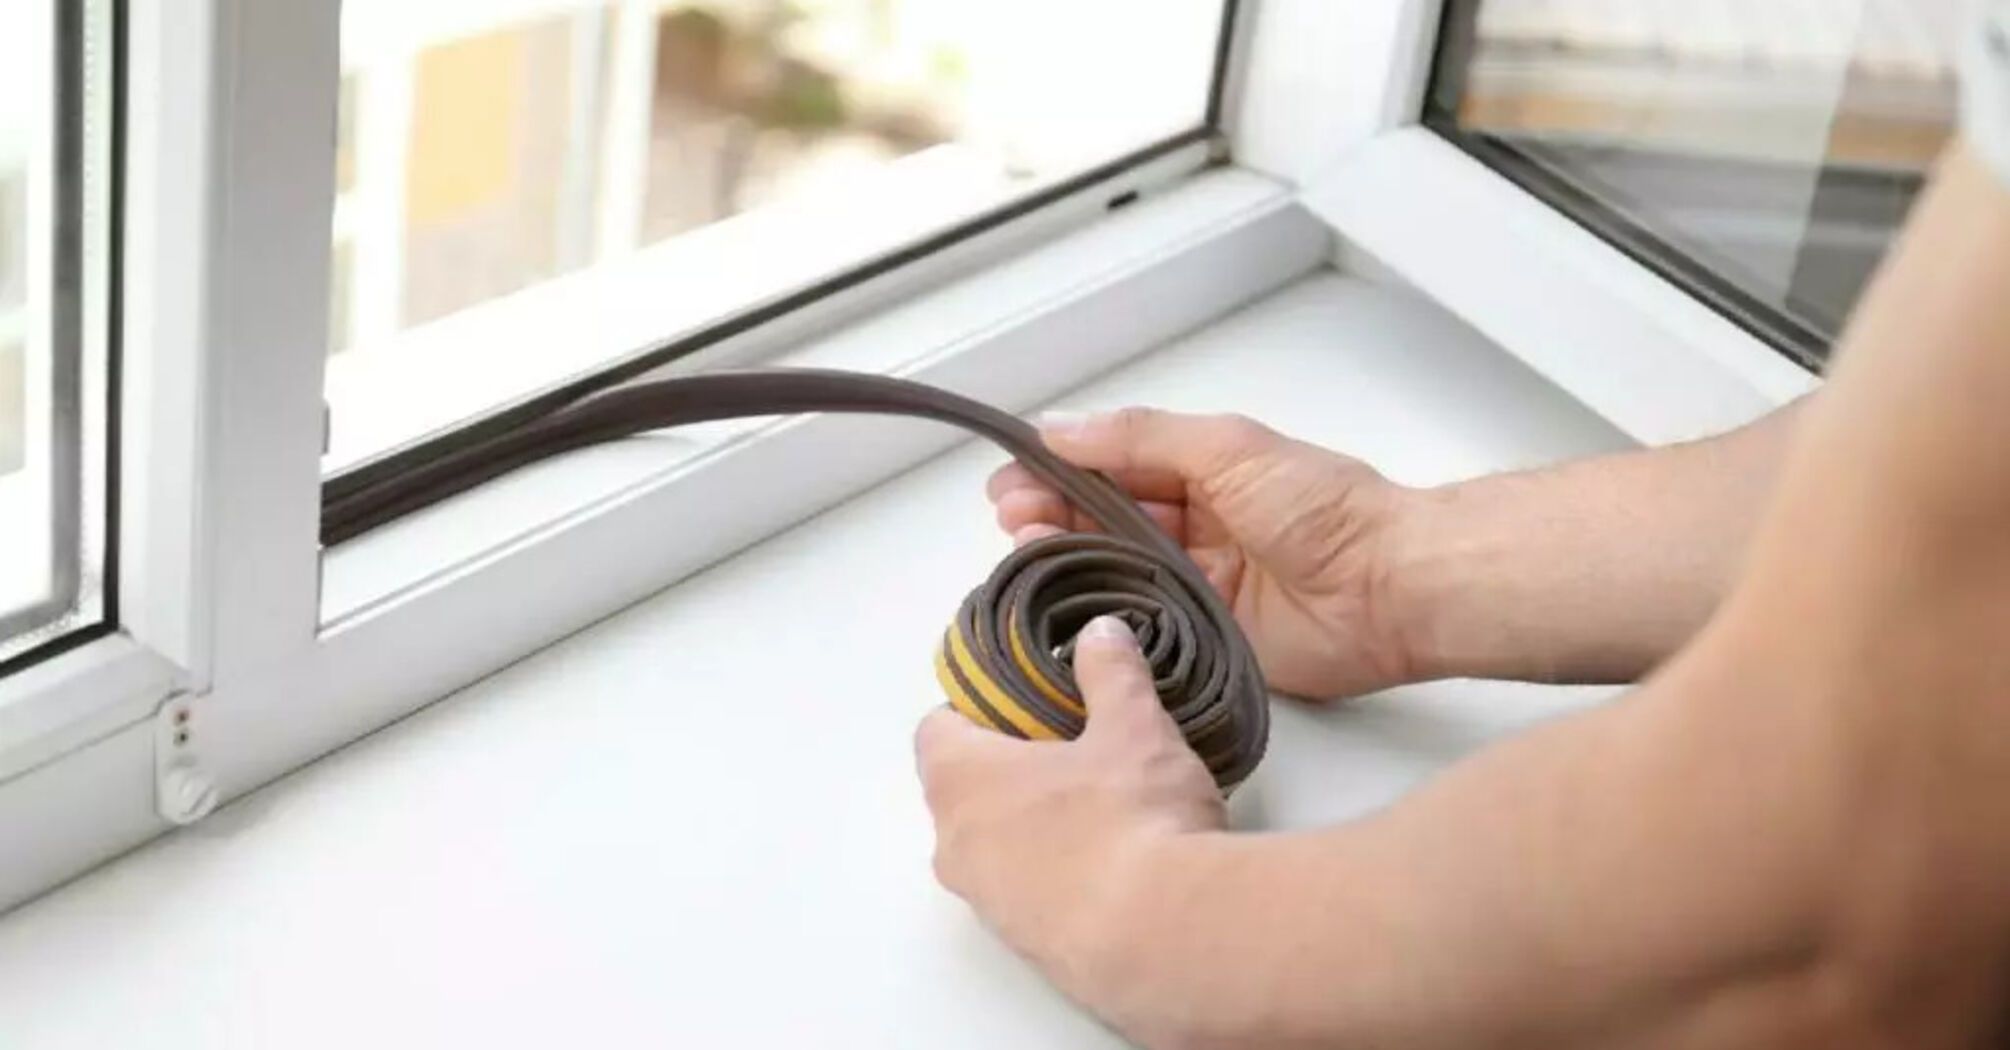 How to insulate windows inexpensively